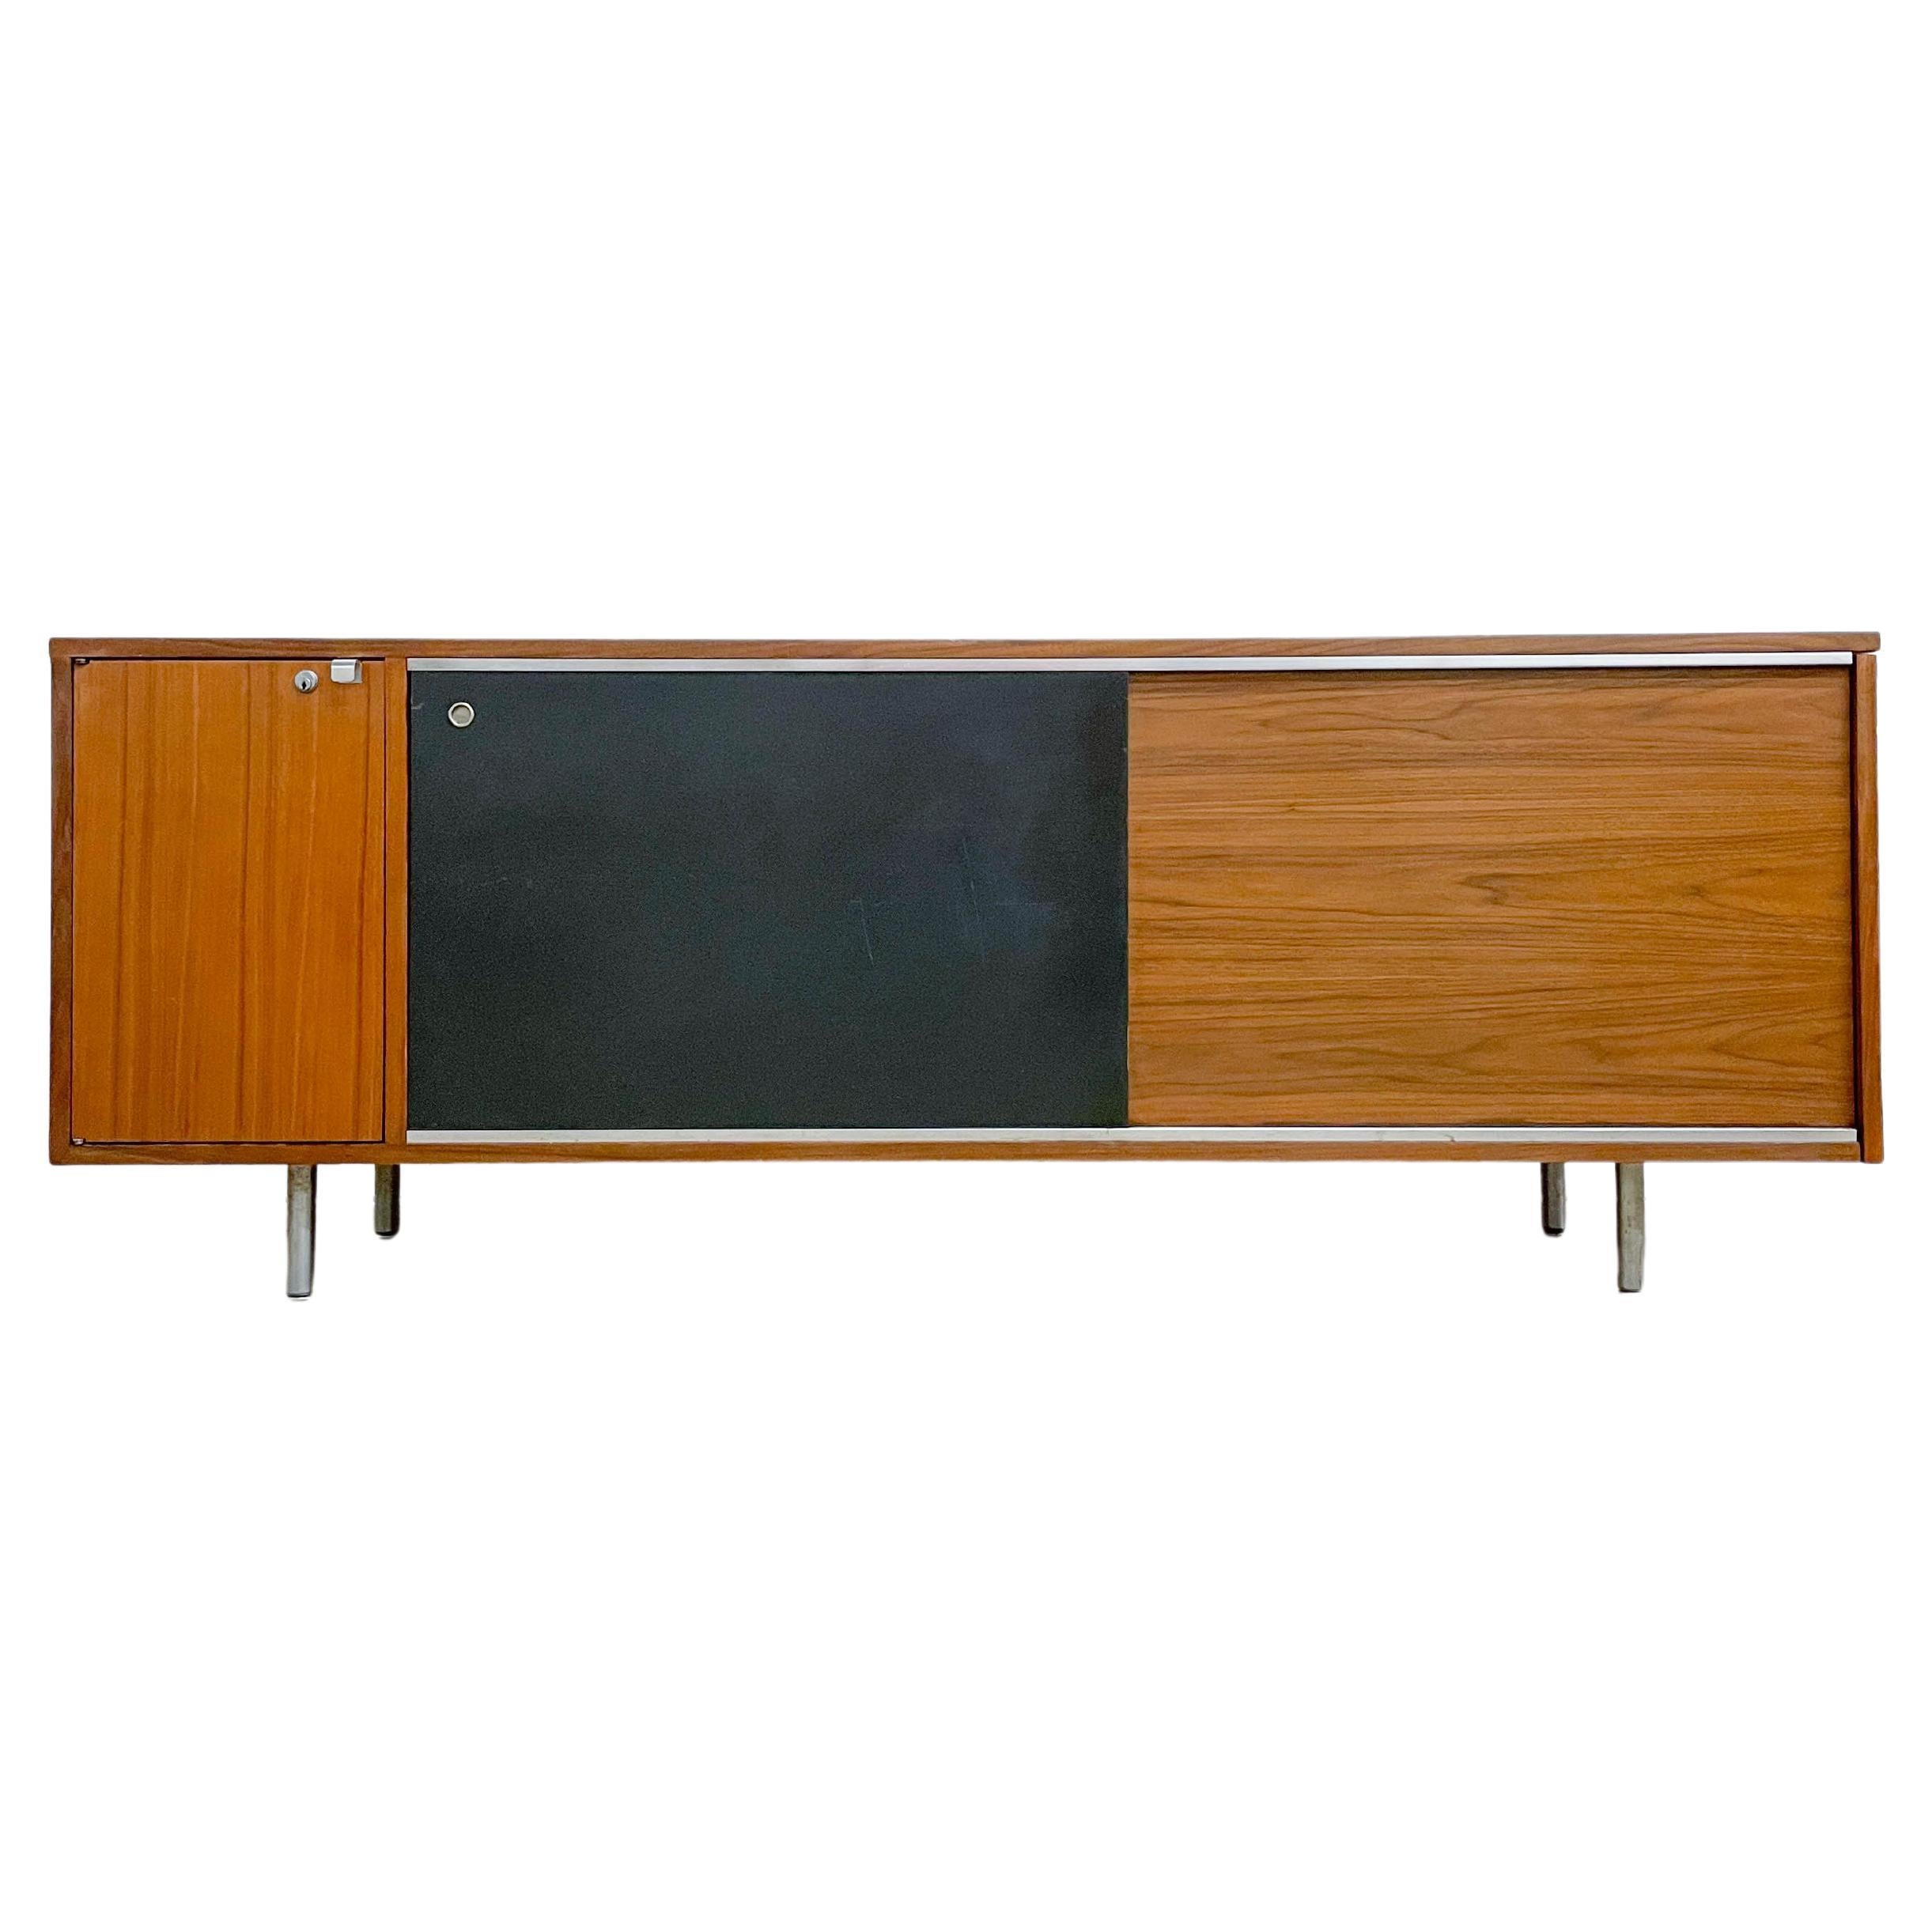 George Nelson Herman Miller Executive Office Credenza